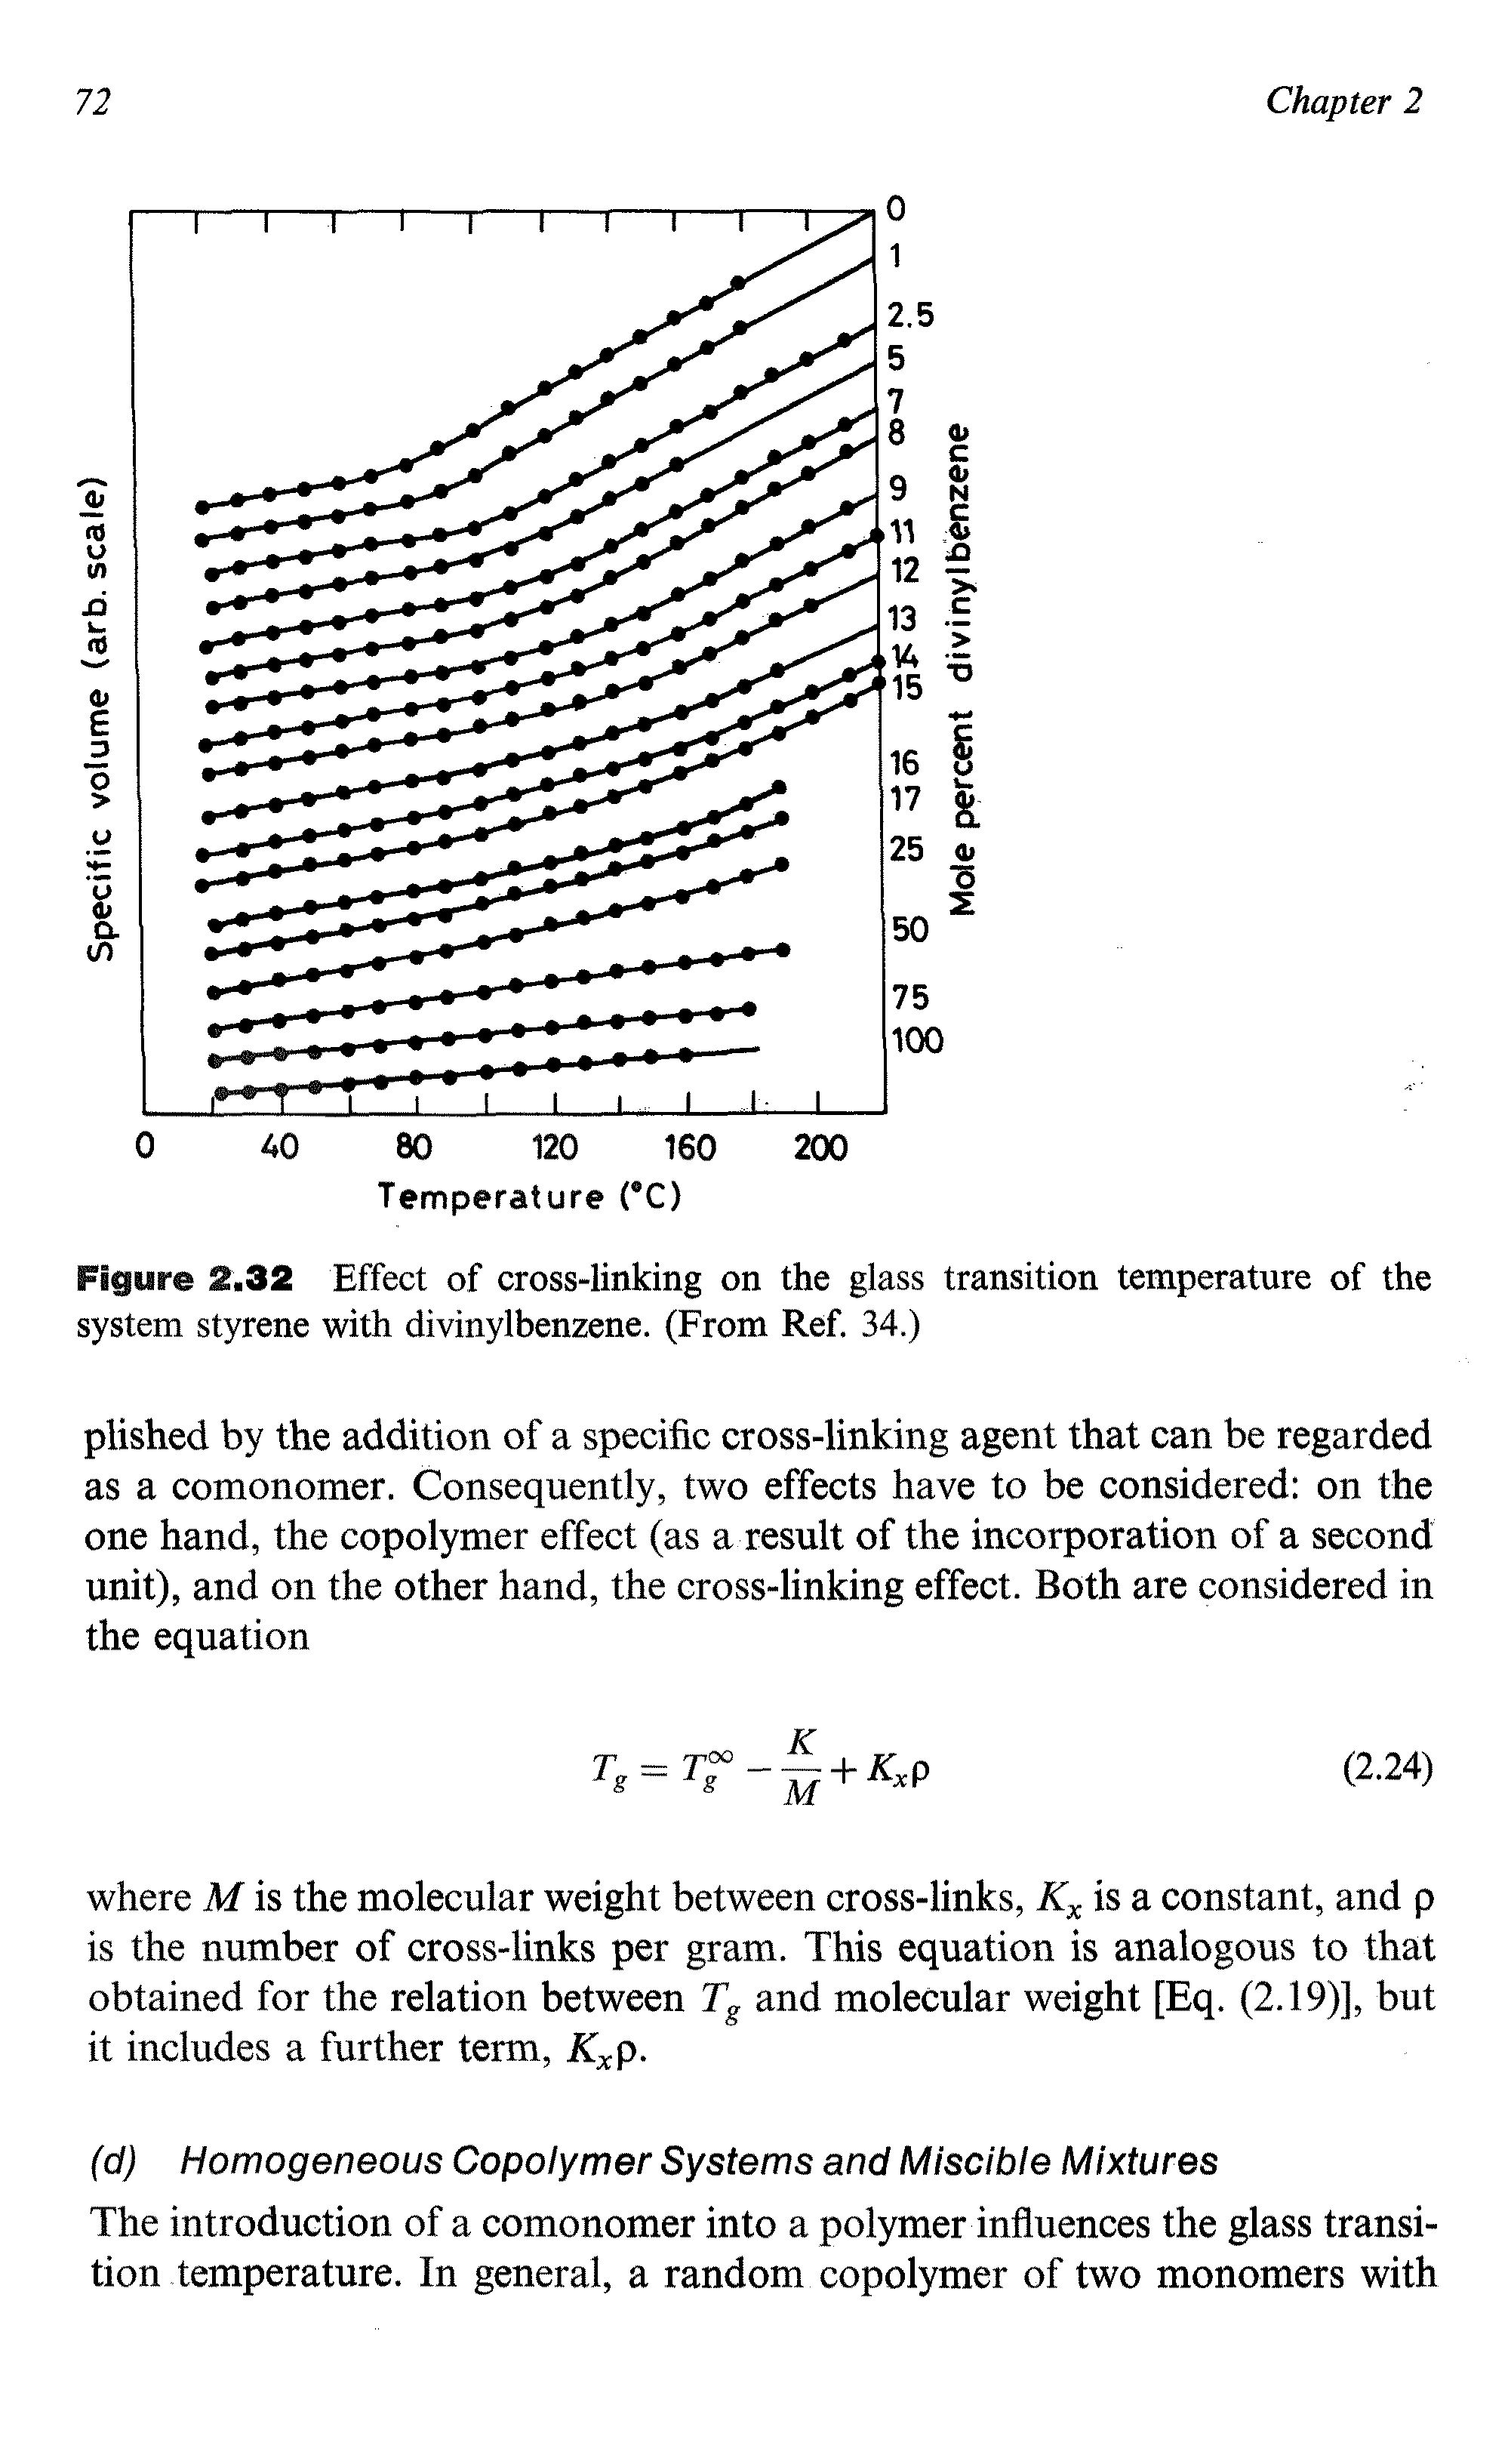 Figure 2.32 Effect of cross-linking on the glass transition temperature of the system styrene with divinylbenzene. (From Ref. 34.)...